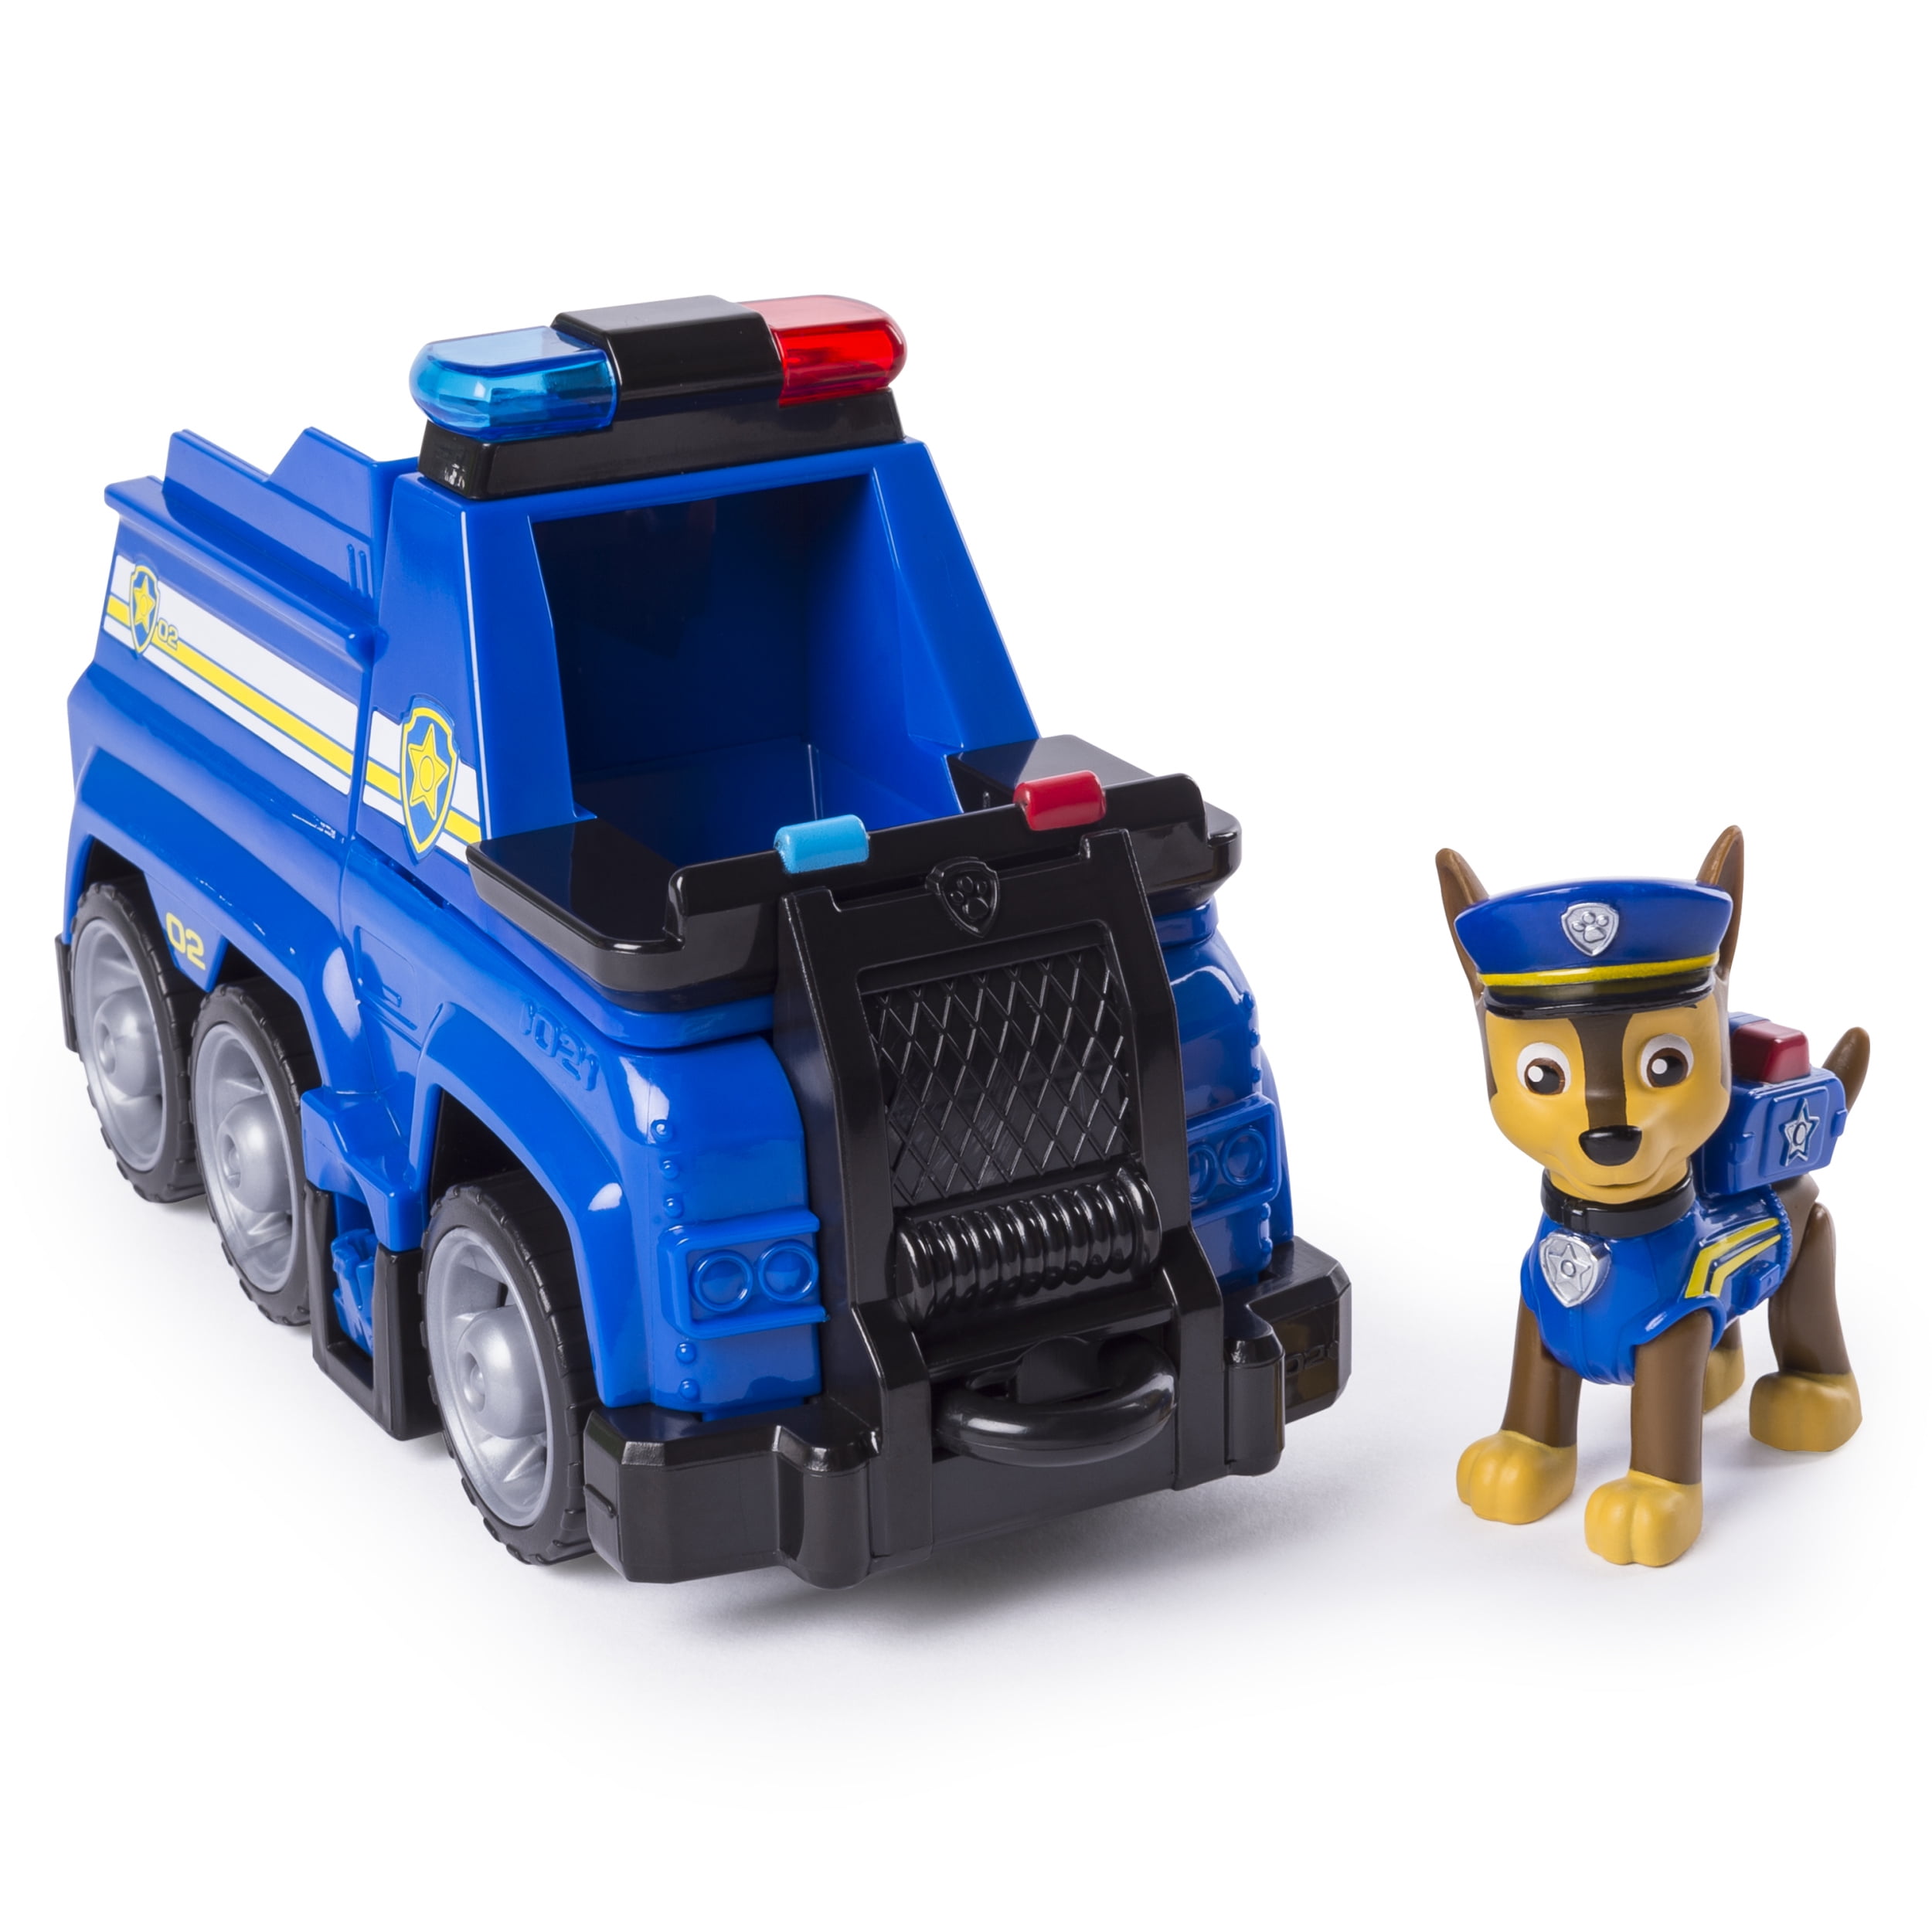 PAW Patrol Ultimate Ultimate Rescue Police Cruiser with Seat and Fold-out Barricade, for Ages 3 and Up - Walmart.com